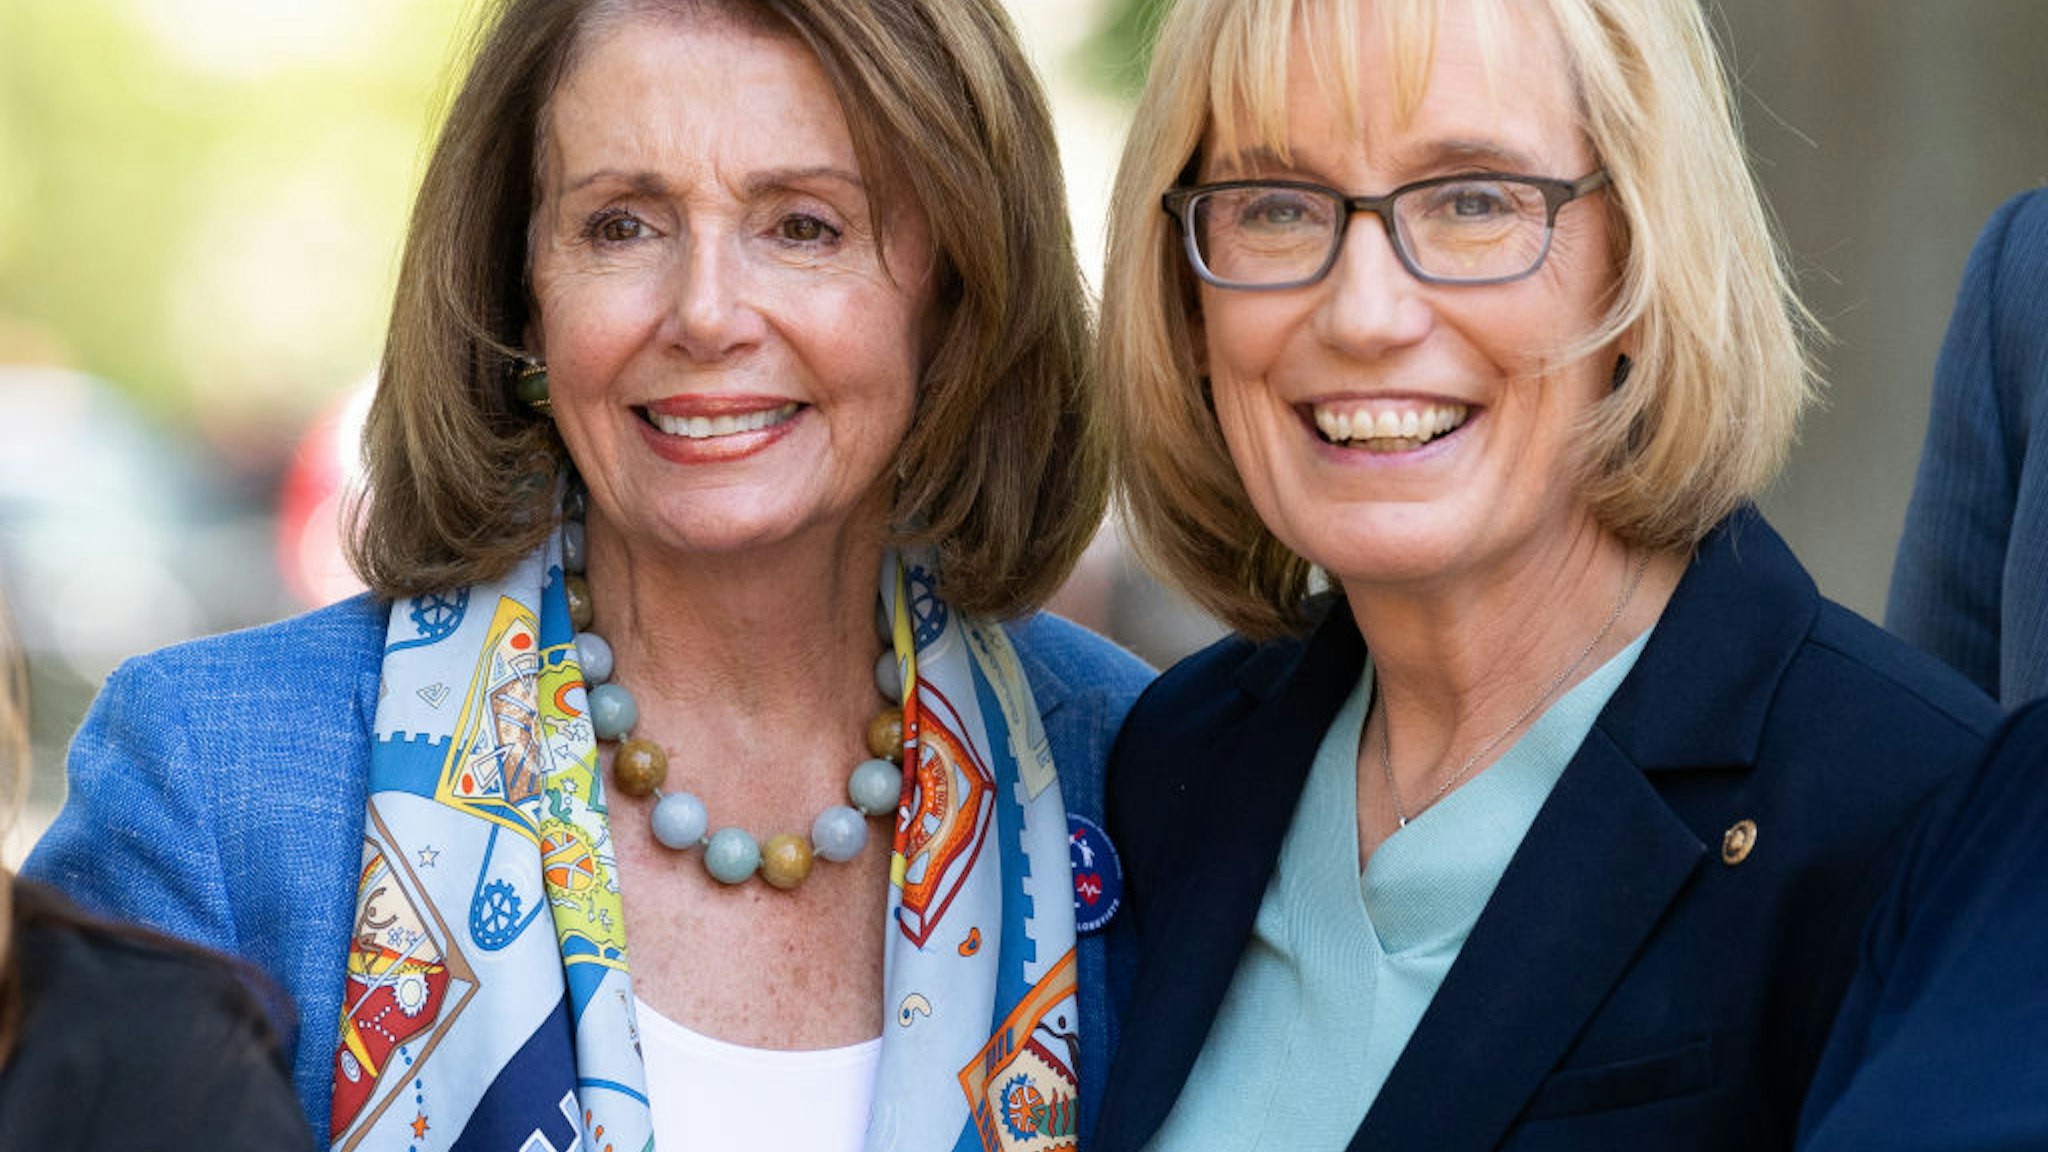 WASHINGTON, DC, UNITED STATES - 2018/06/26: United States Representative Nancy Pelosi (D-CA) and Senator Maggie Hassan (D-NH) at a press conference in the US Capitol. (Photo by Michael Brochstein/SOPA Images/LightRocket via Getty Images)